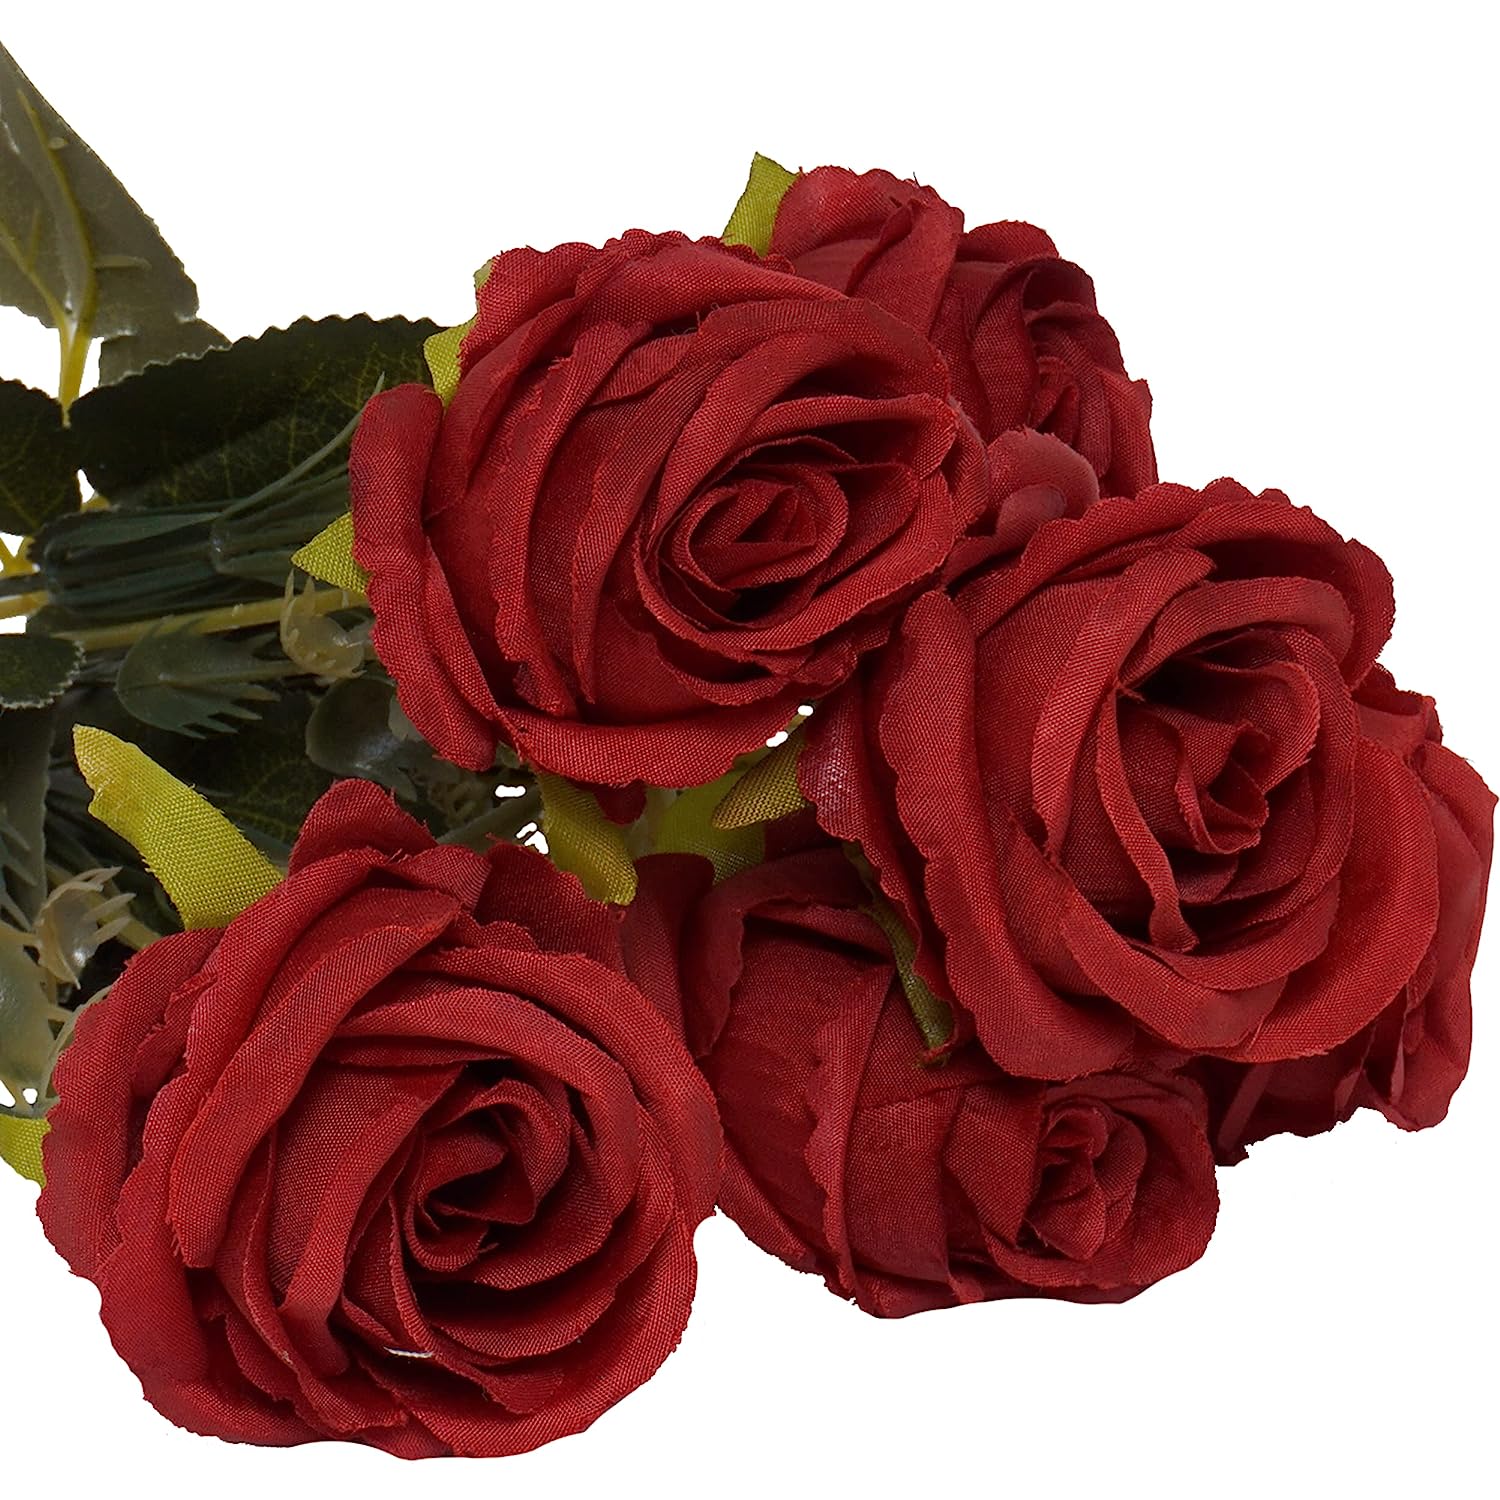 Red Fake Roses with Stems for DIY Home Decoration